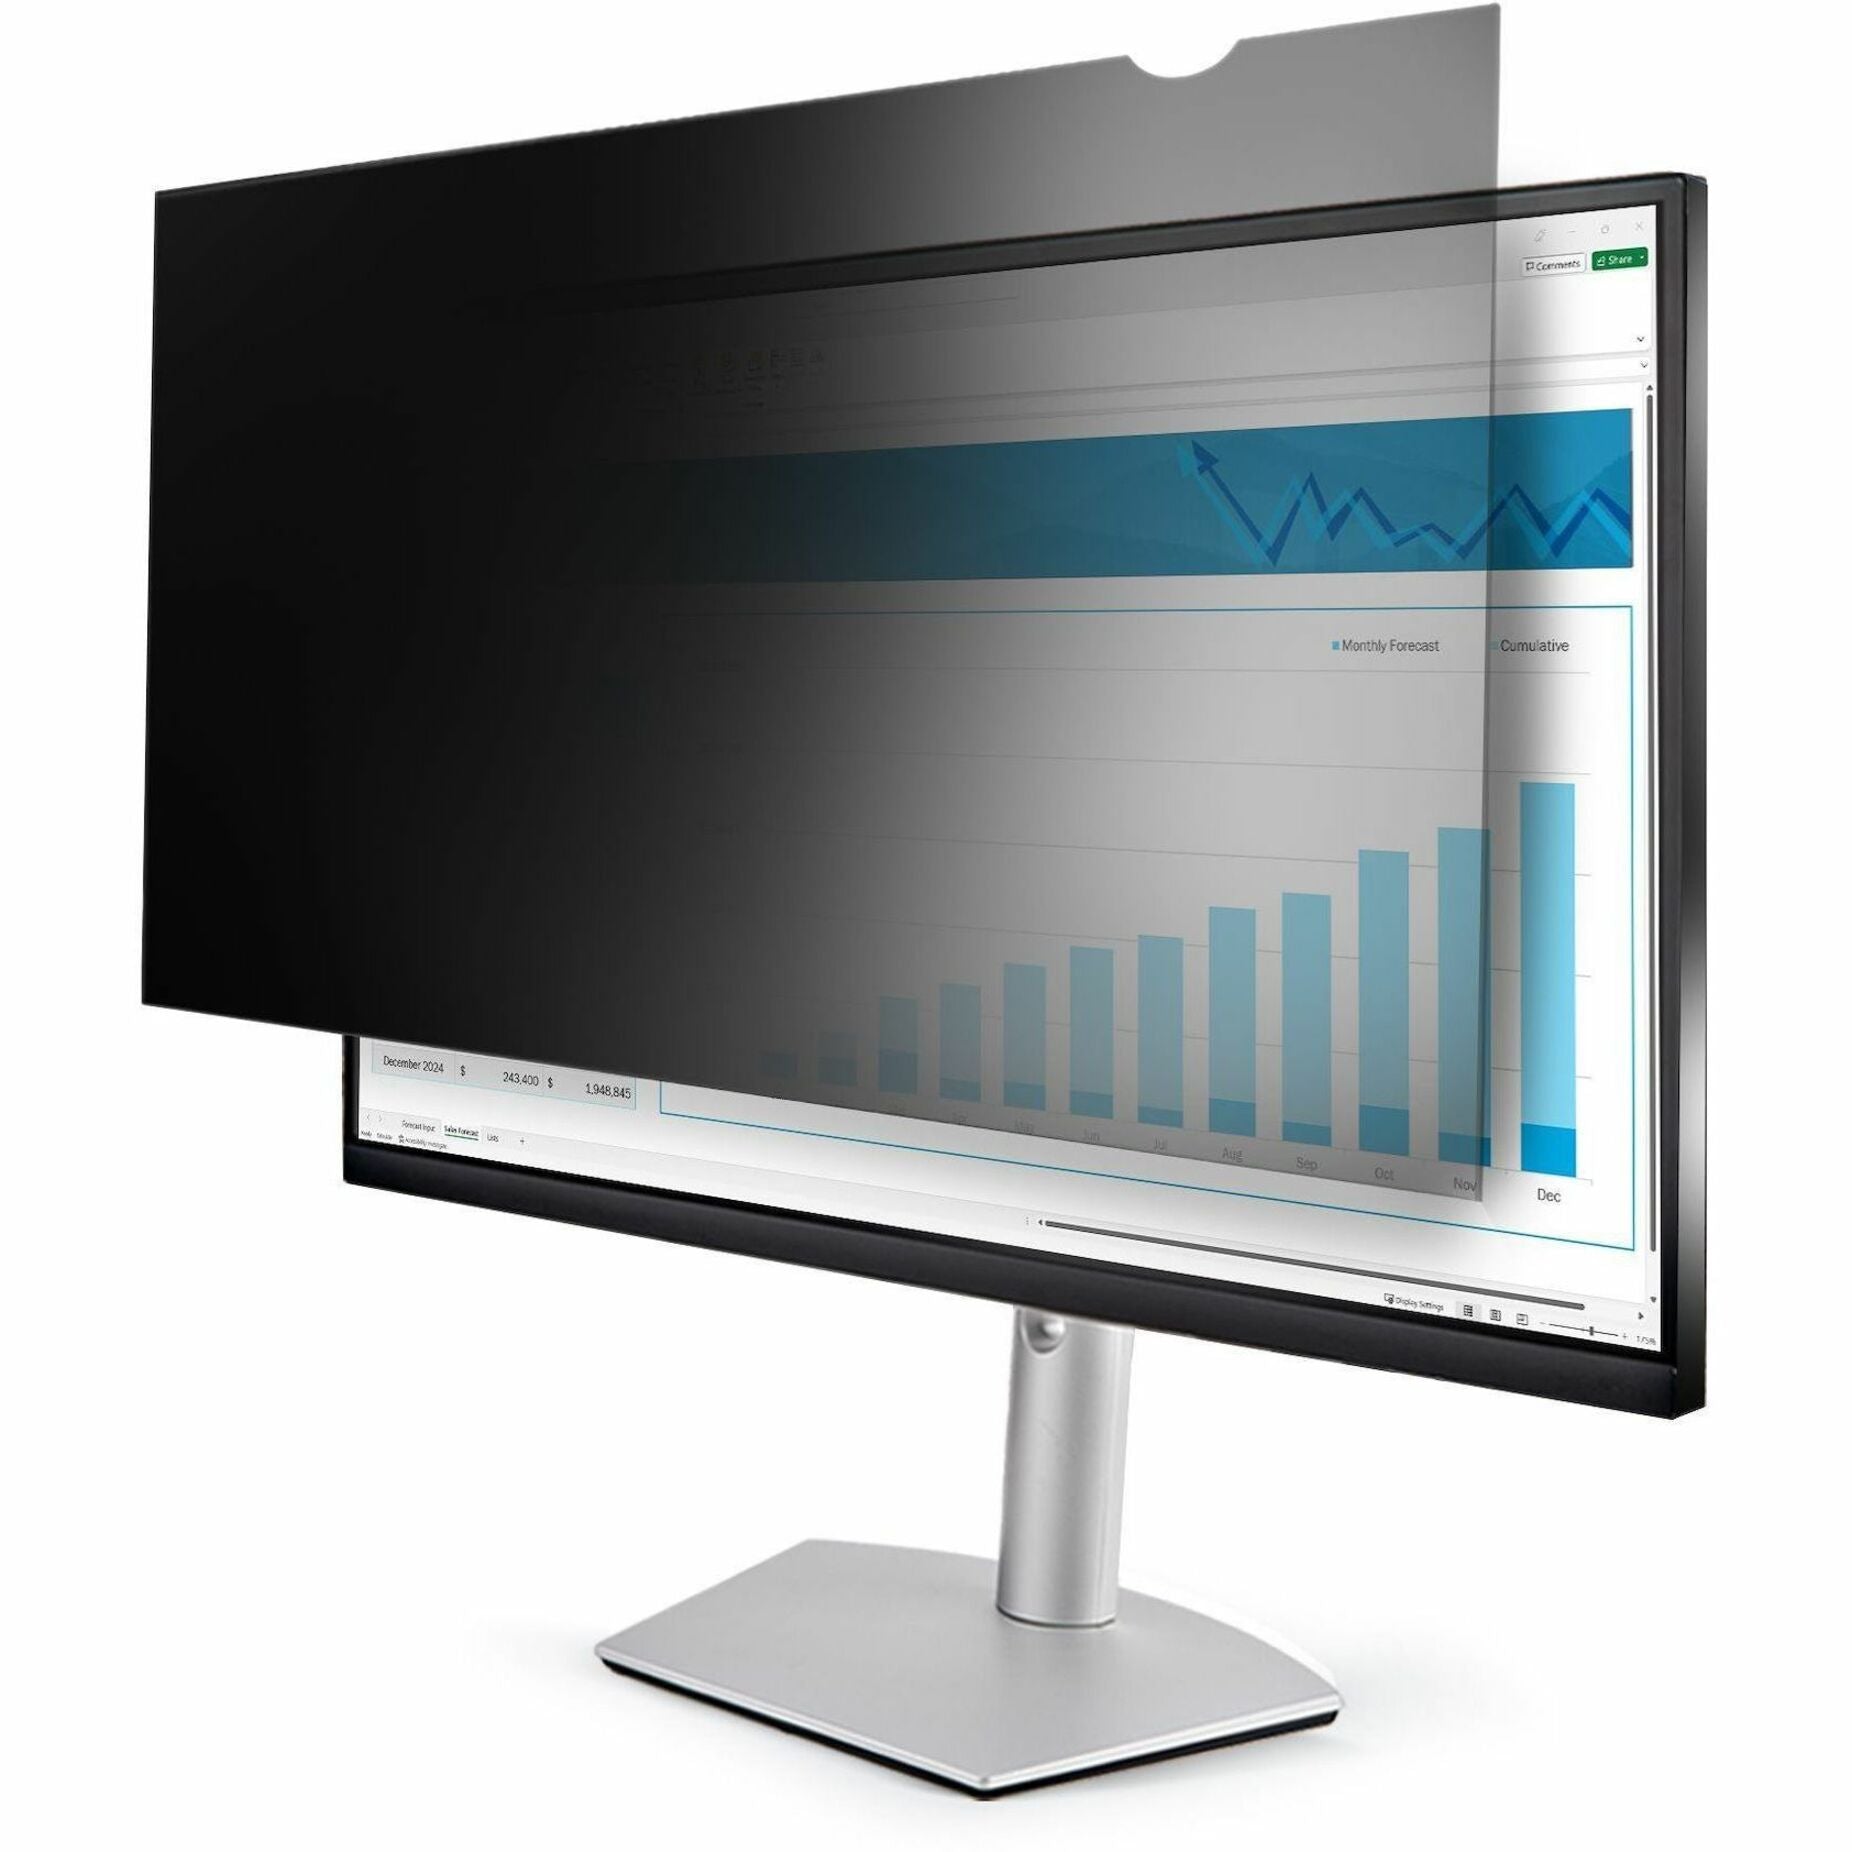 StarTech.com PRIVACY-SCREEN-185M Privacy Screen Filter, Blue Light Reduction, Reversible Matte-to-Glossy, 16:9, 18.5" Monitor